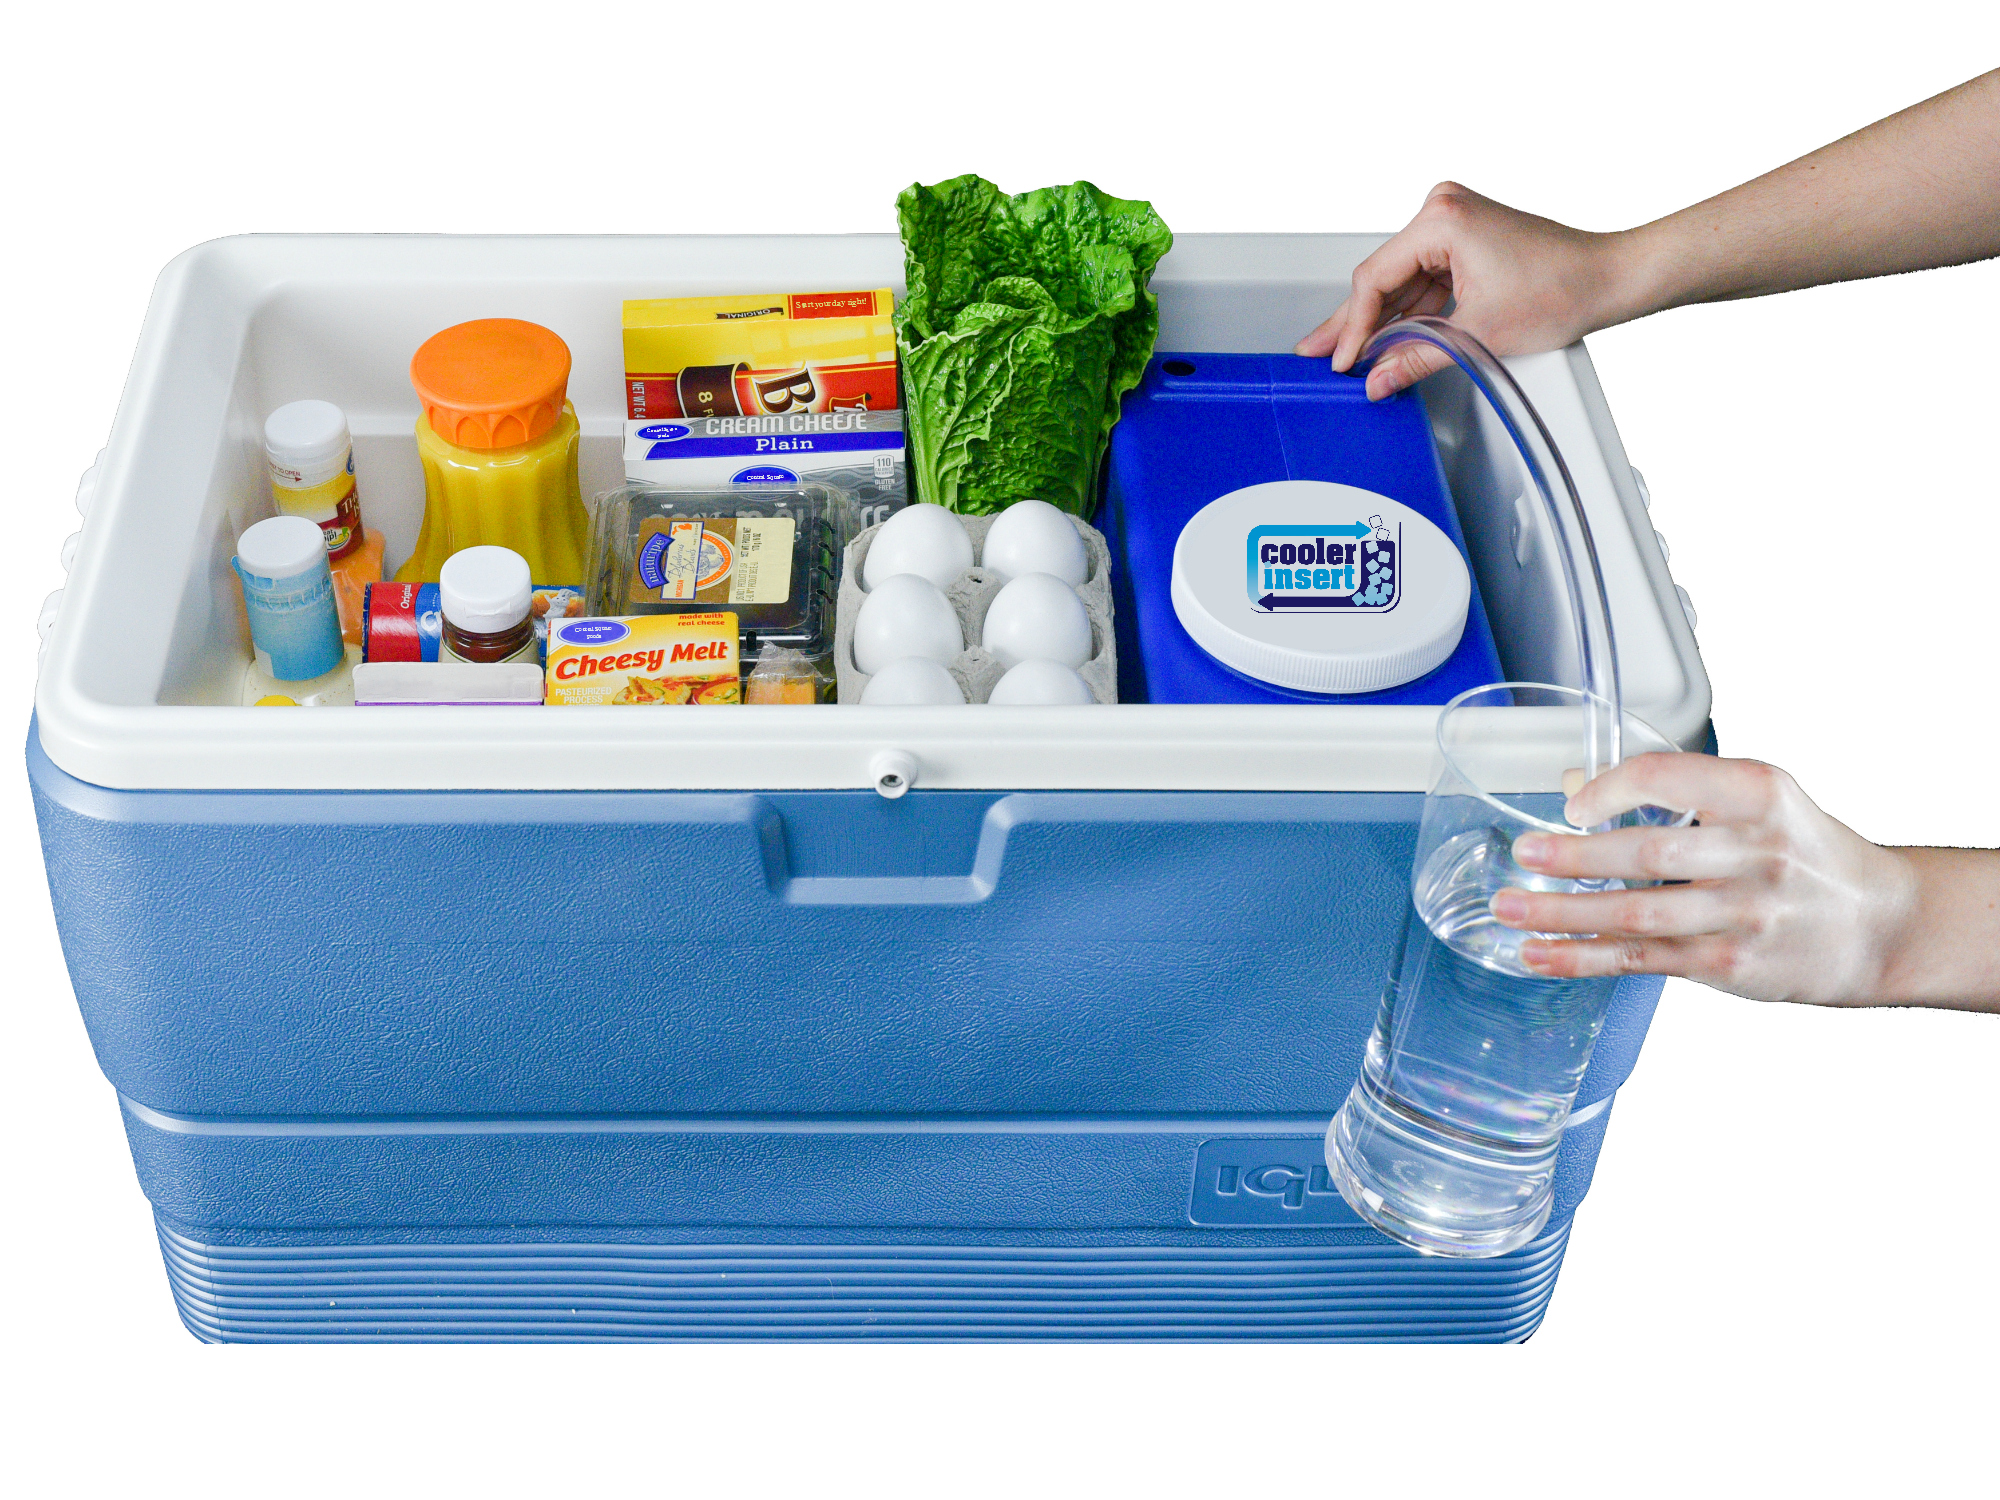 No need to clean or unpack your messy cooler